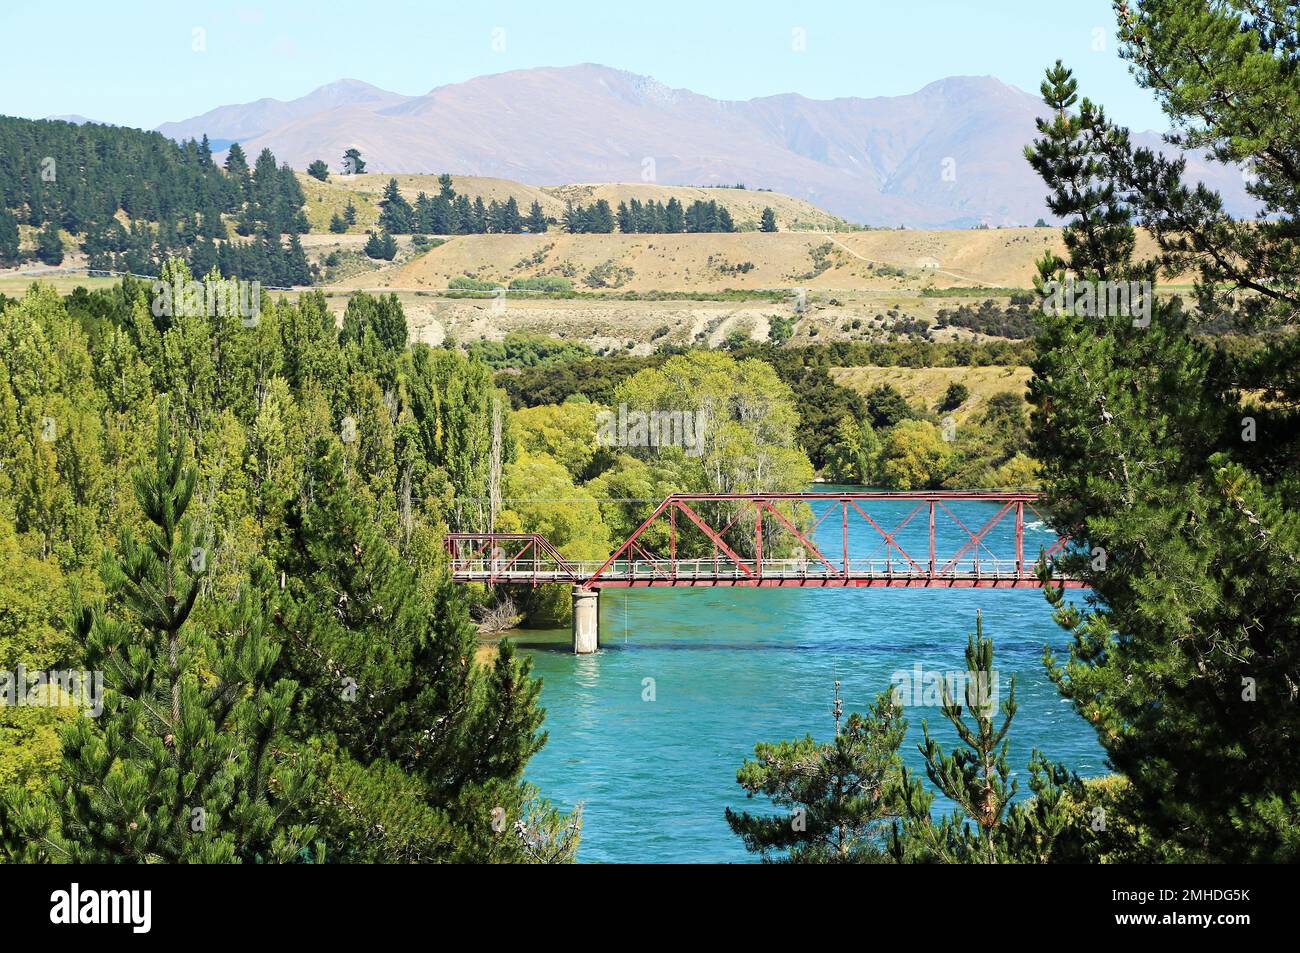 The red bridge between trees - Clutha River - New Zealand Stock Photo